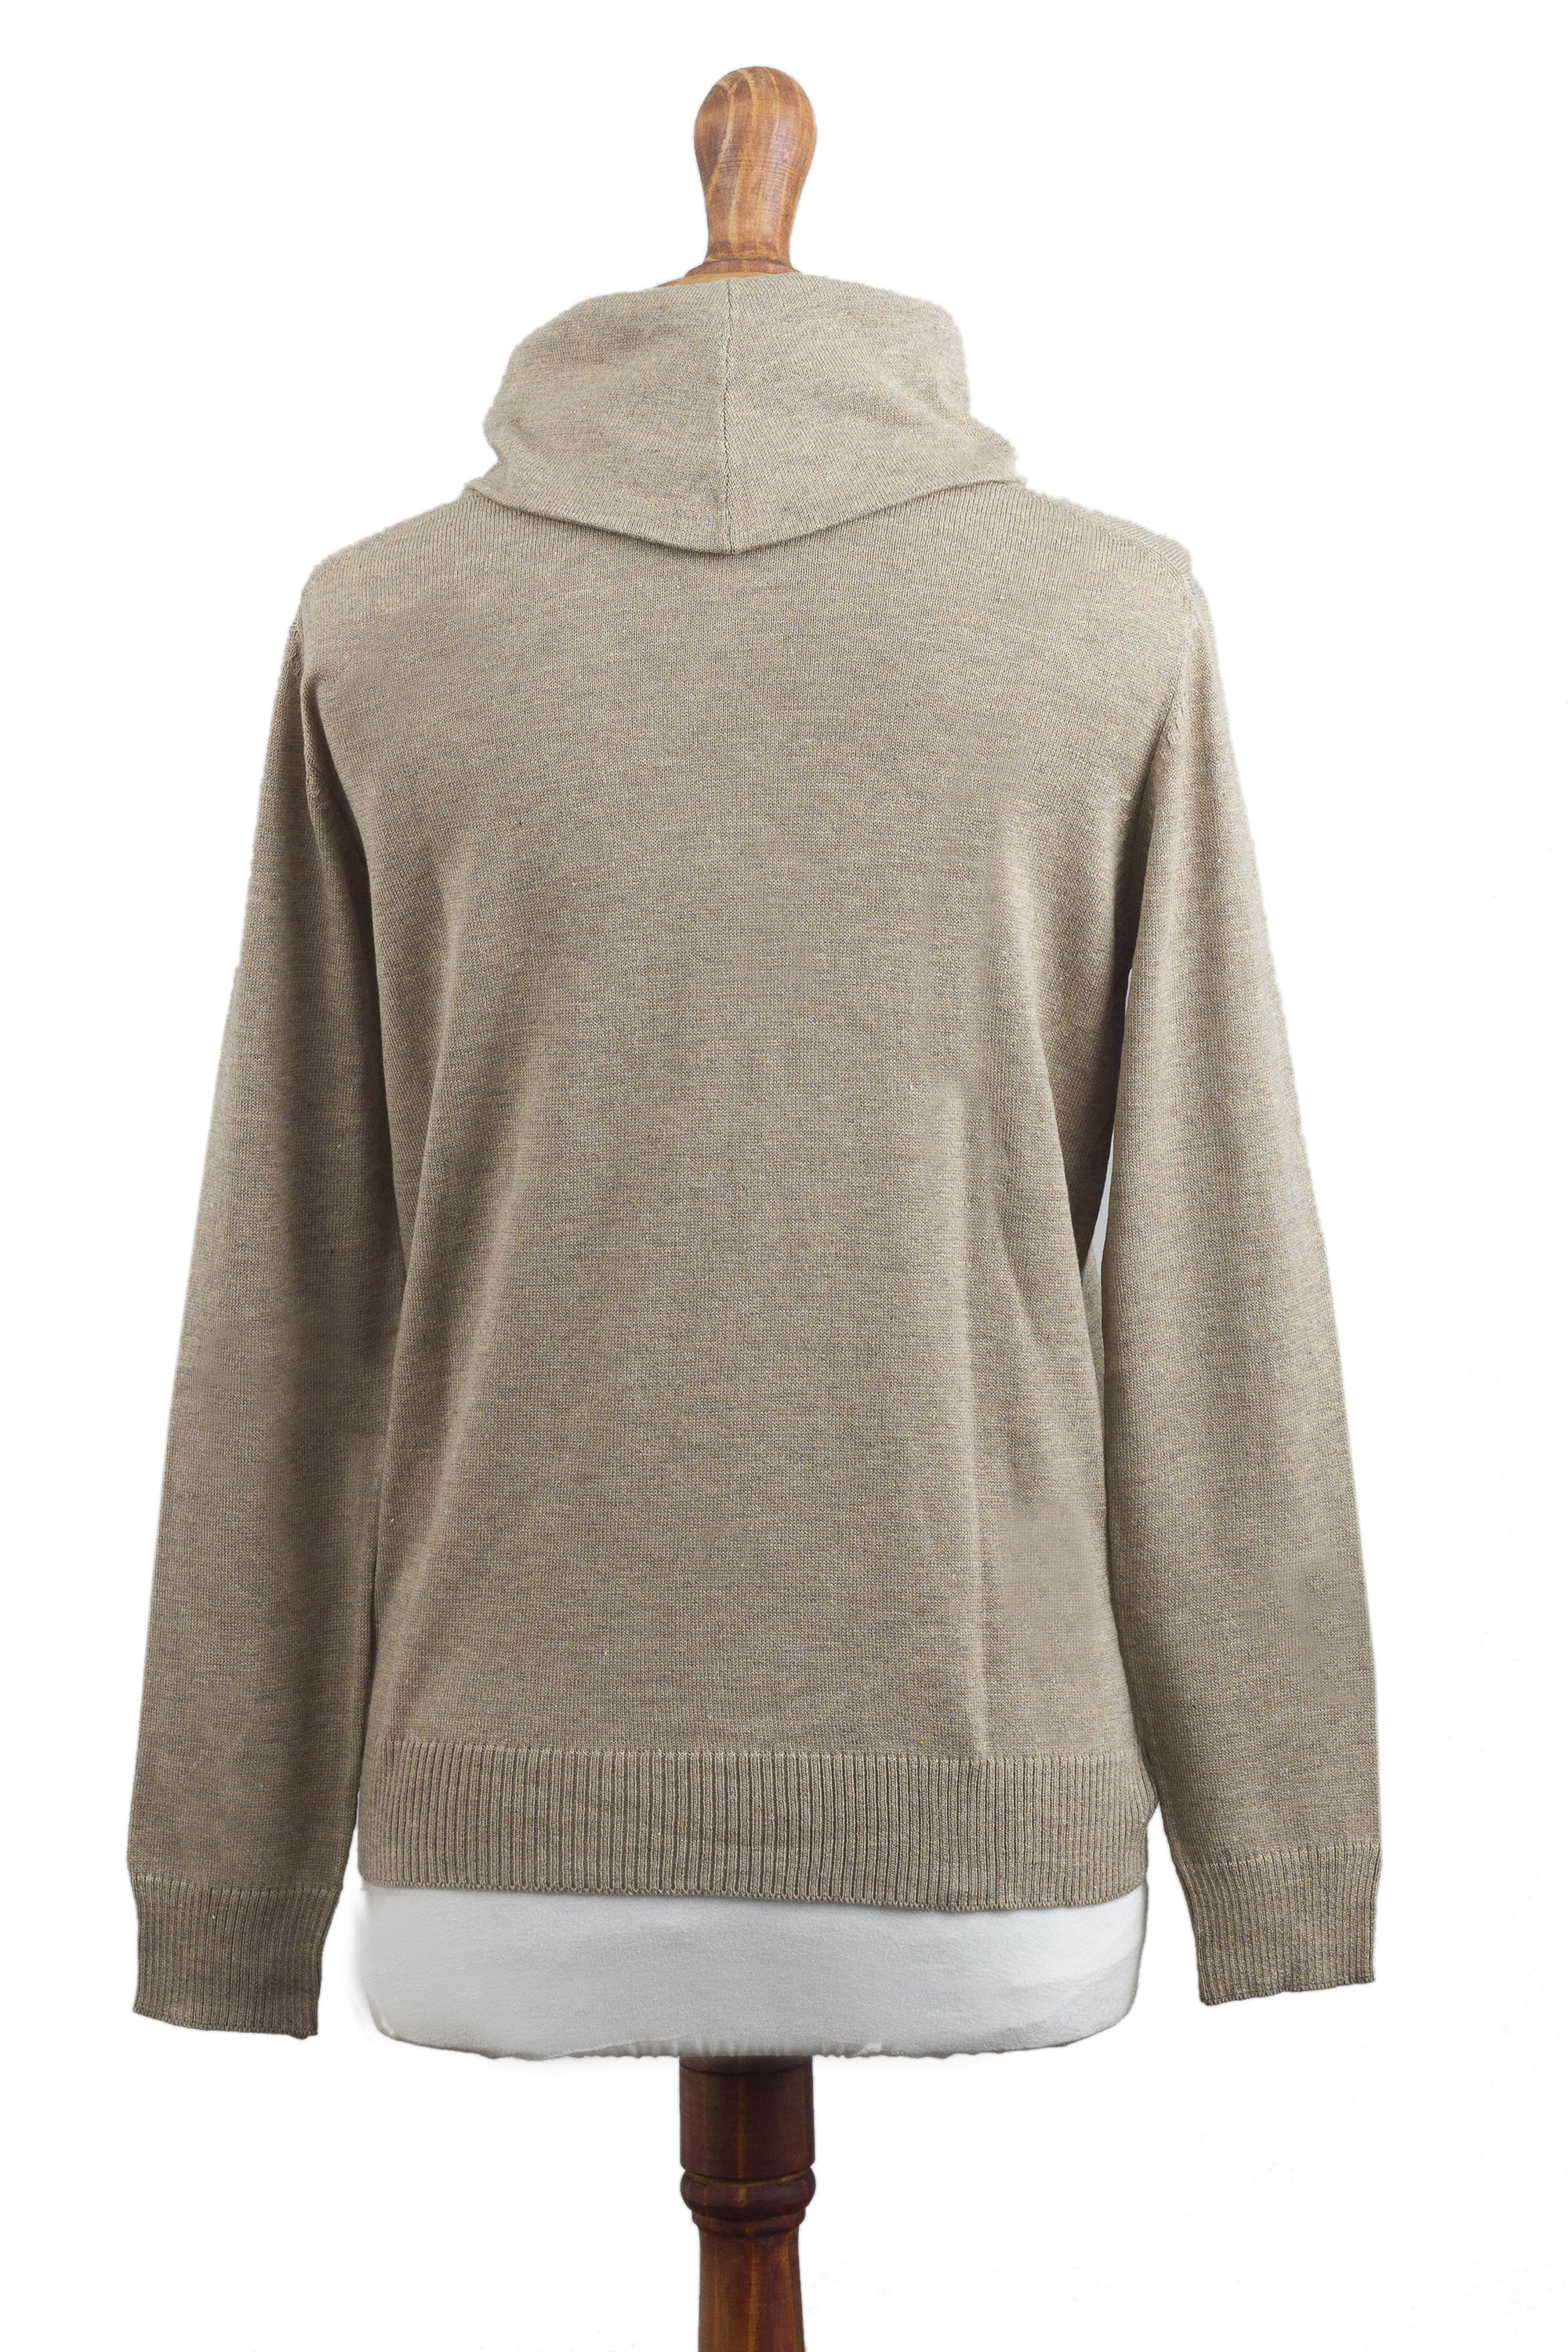 UNICEF Market | Cotton Blend Pullover in Taupe from Peru - Taupe ...